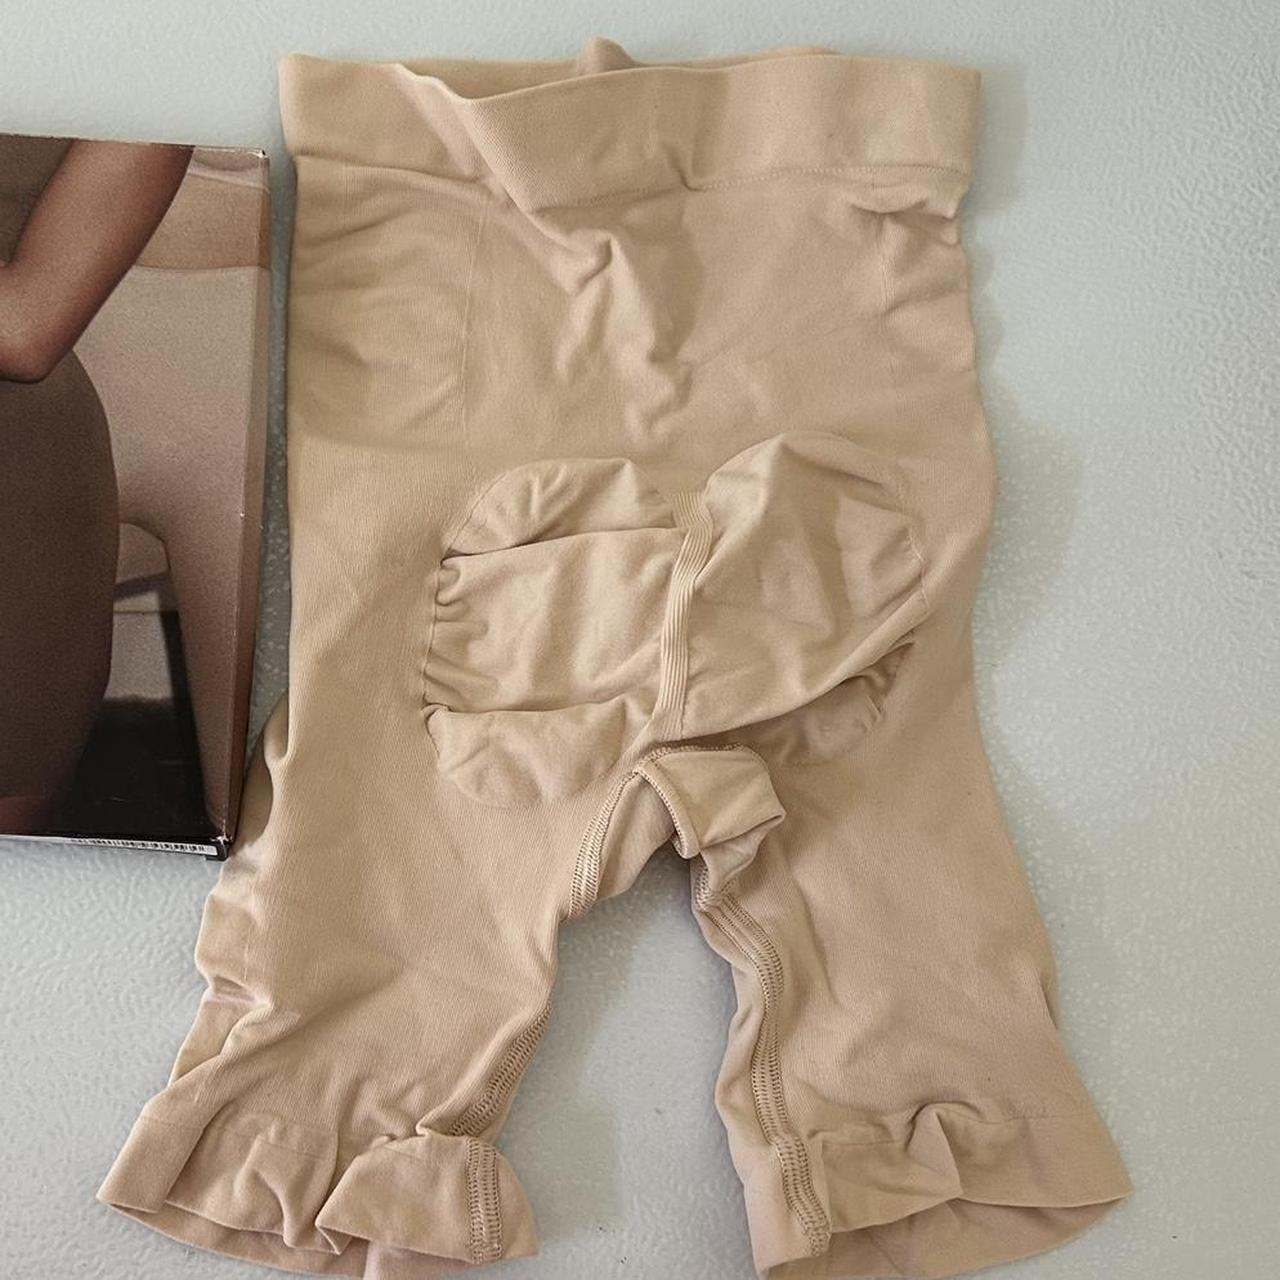 Skims sculpting mid thigh shorts. New in box. Size: - Depop